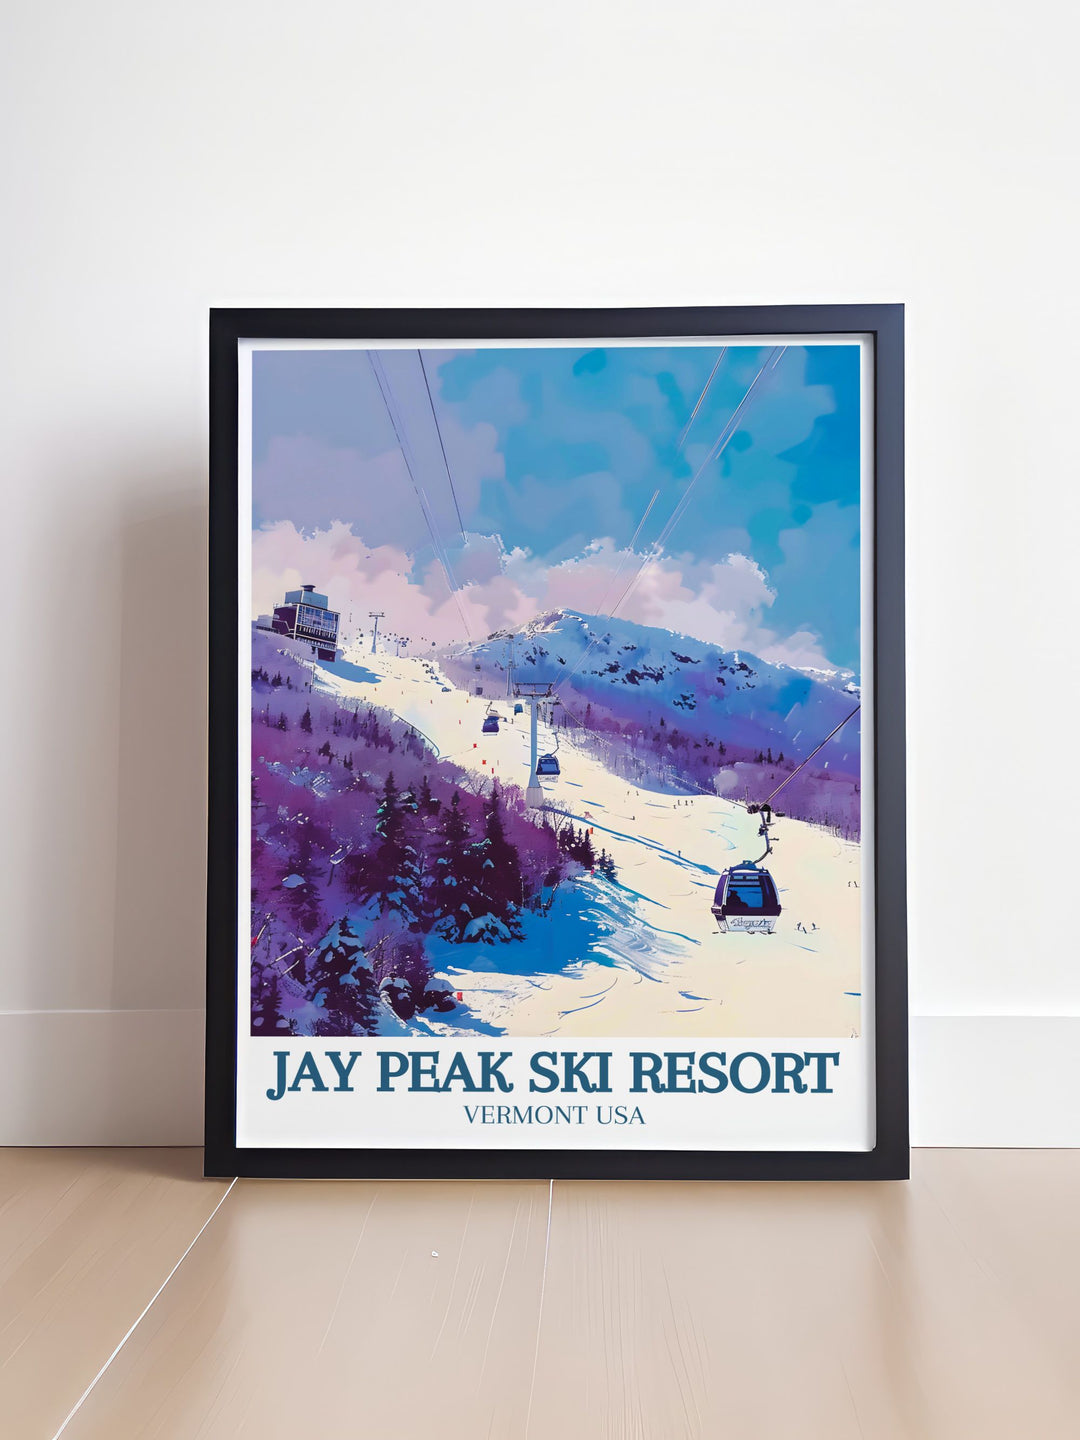 The detailed depiction of Jay Peaks extensive trails and diverse skiing opportunities makes this travel poster a great addition for winter sports fans.